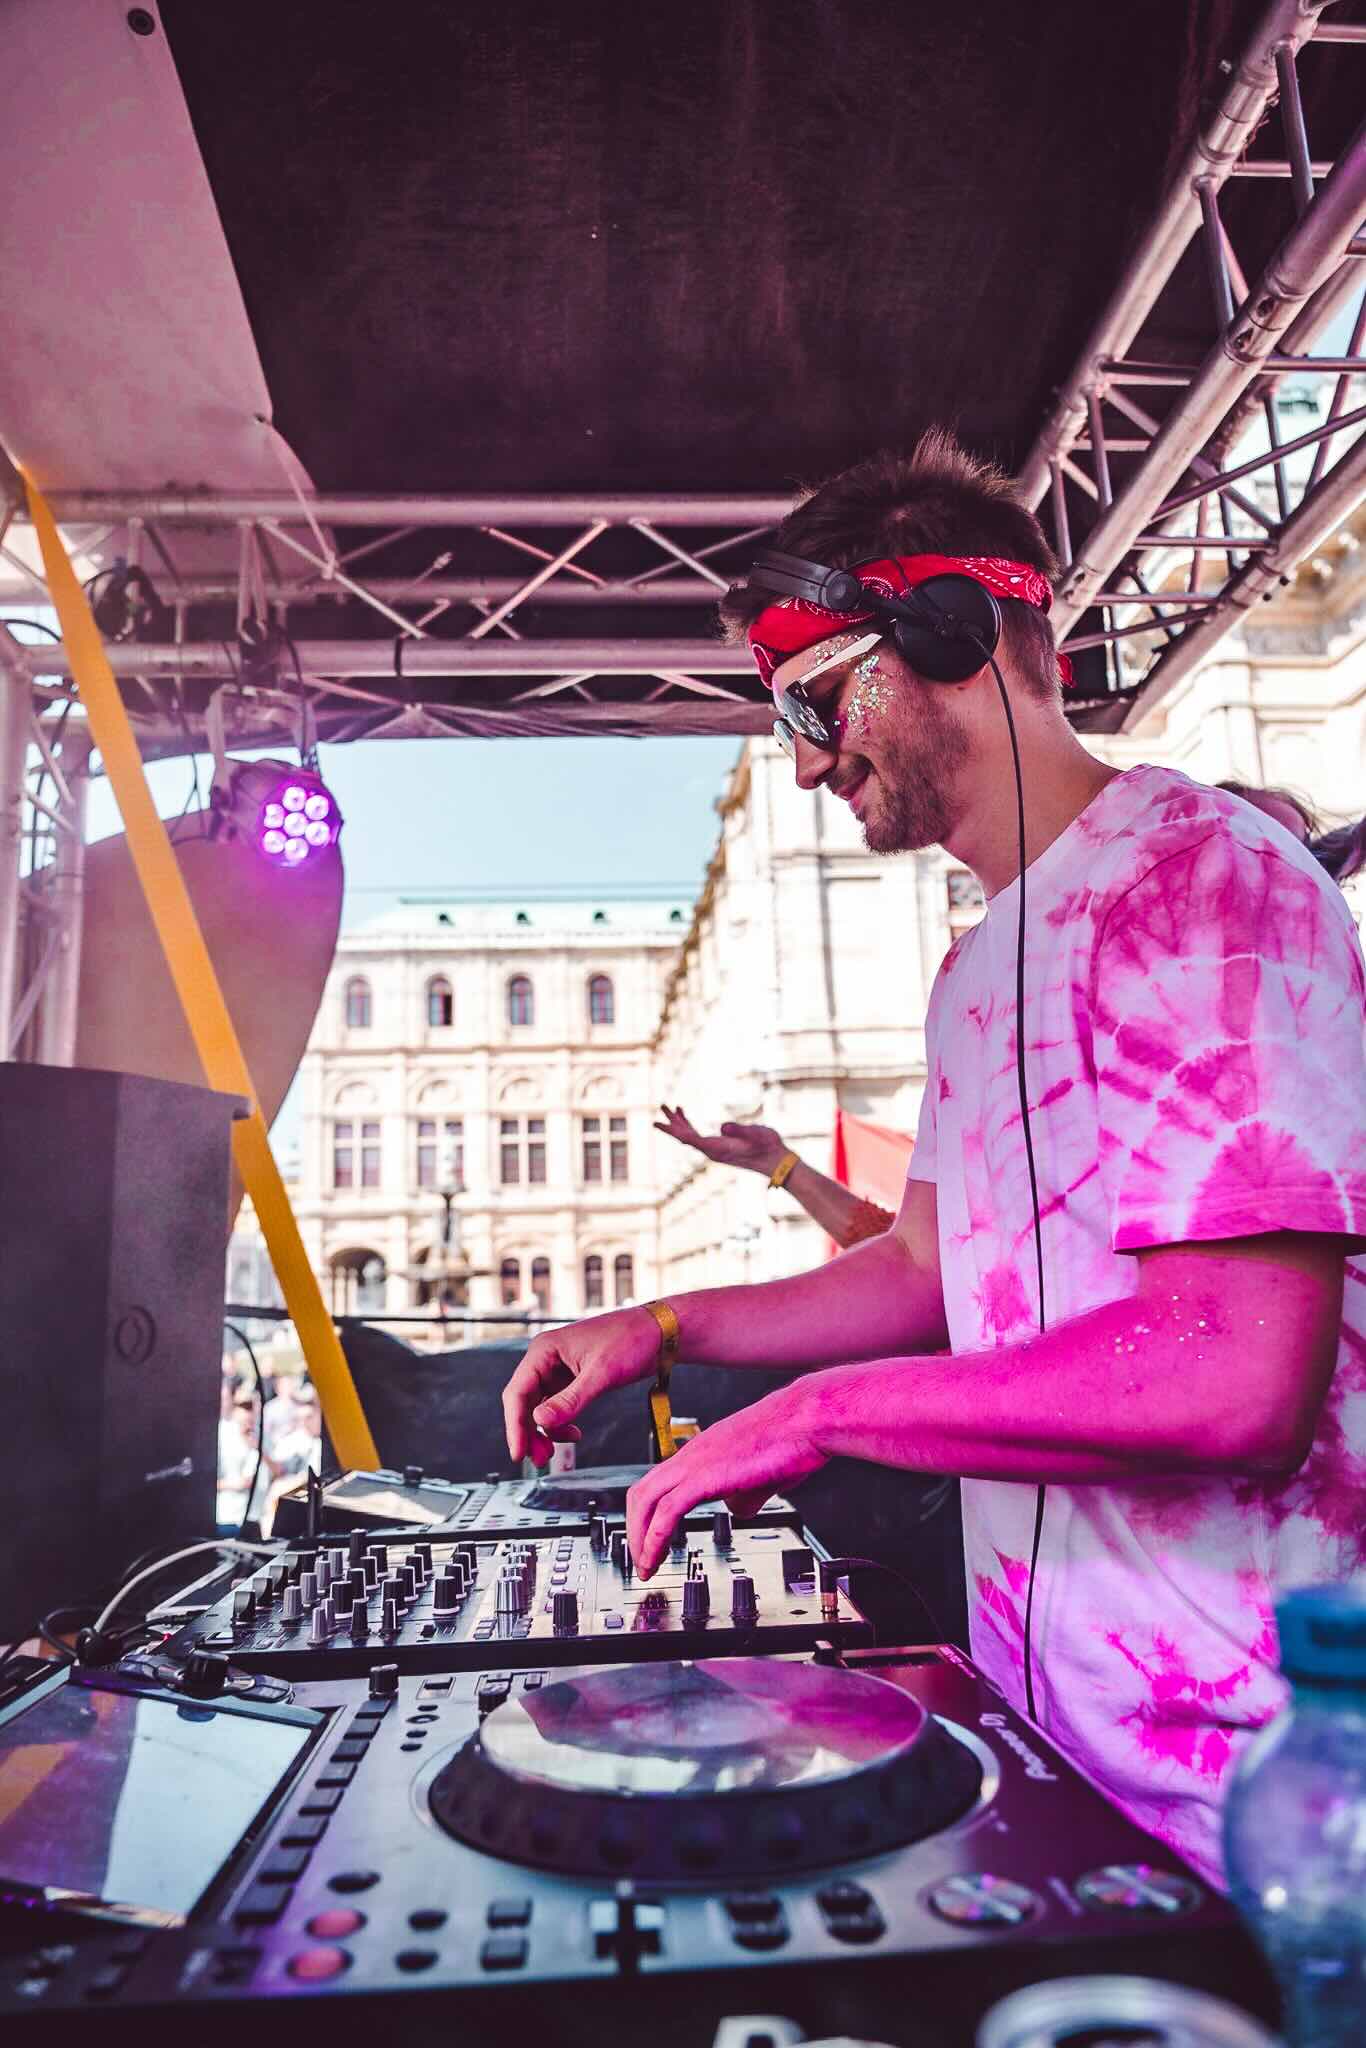 Dynamic image of a DJ at a live event, wearing a red bandana and sunglasses, actively adjusting controls on a DJ mixer. He is dressed in a pink tie-dye shirt, with a touch of glitter on his face, capturing the lively and festive atmosphere of the scene. The backdrop features the historical architecture of a city square, suggesting a vibrant outdoor music festival setting.